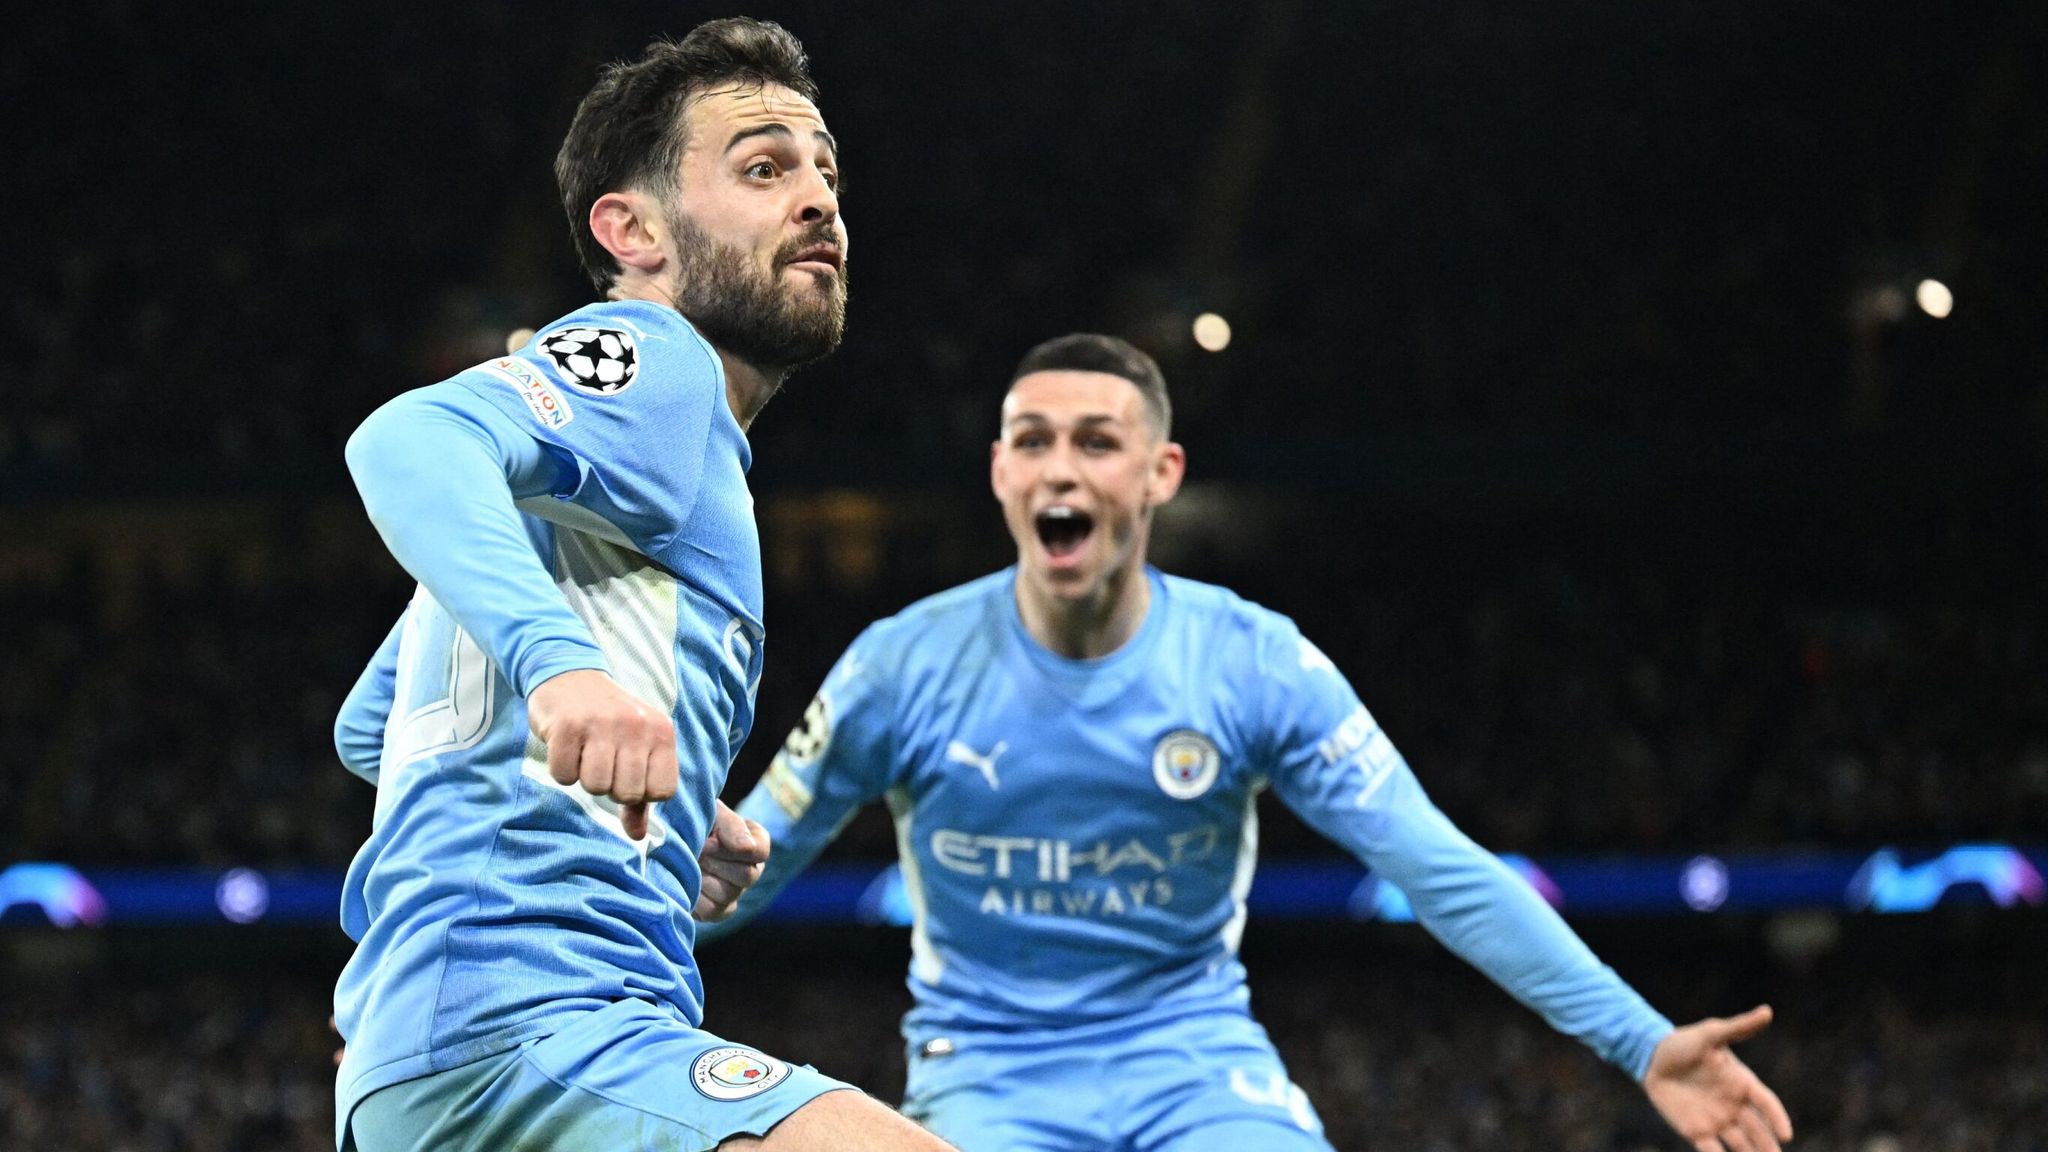 Champions League Semifinal: Manchester City vs. Real Madrid